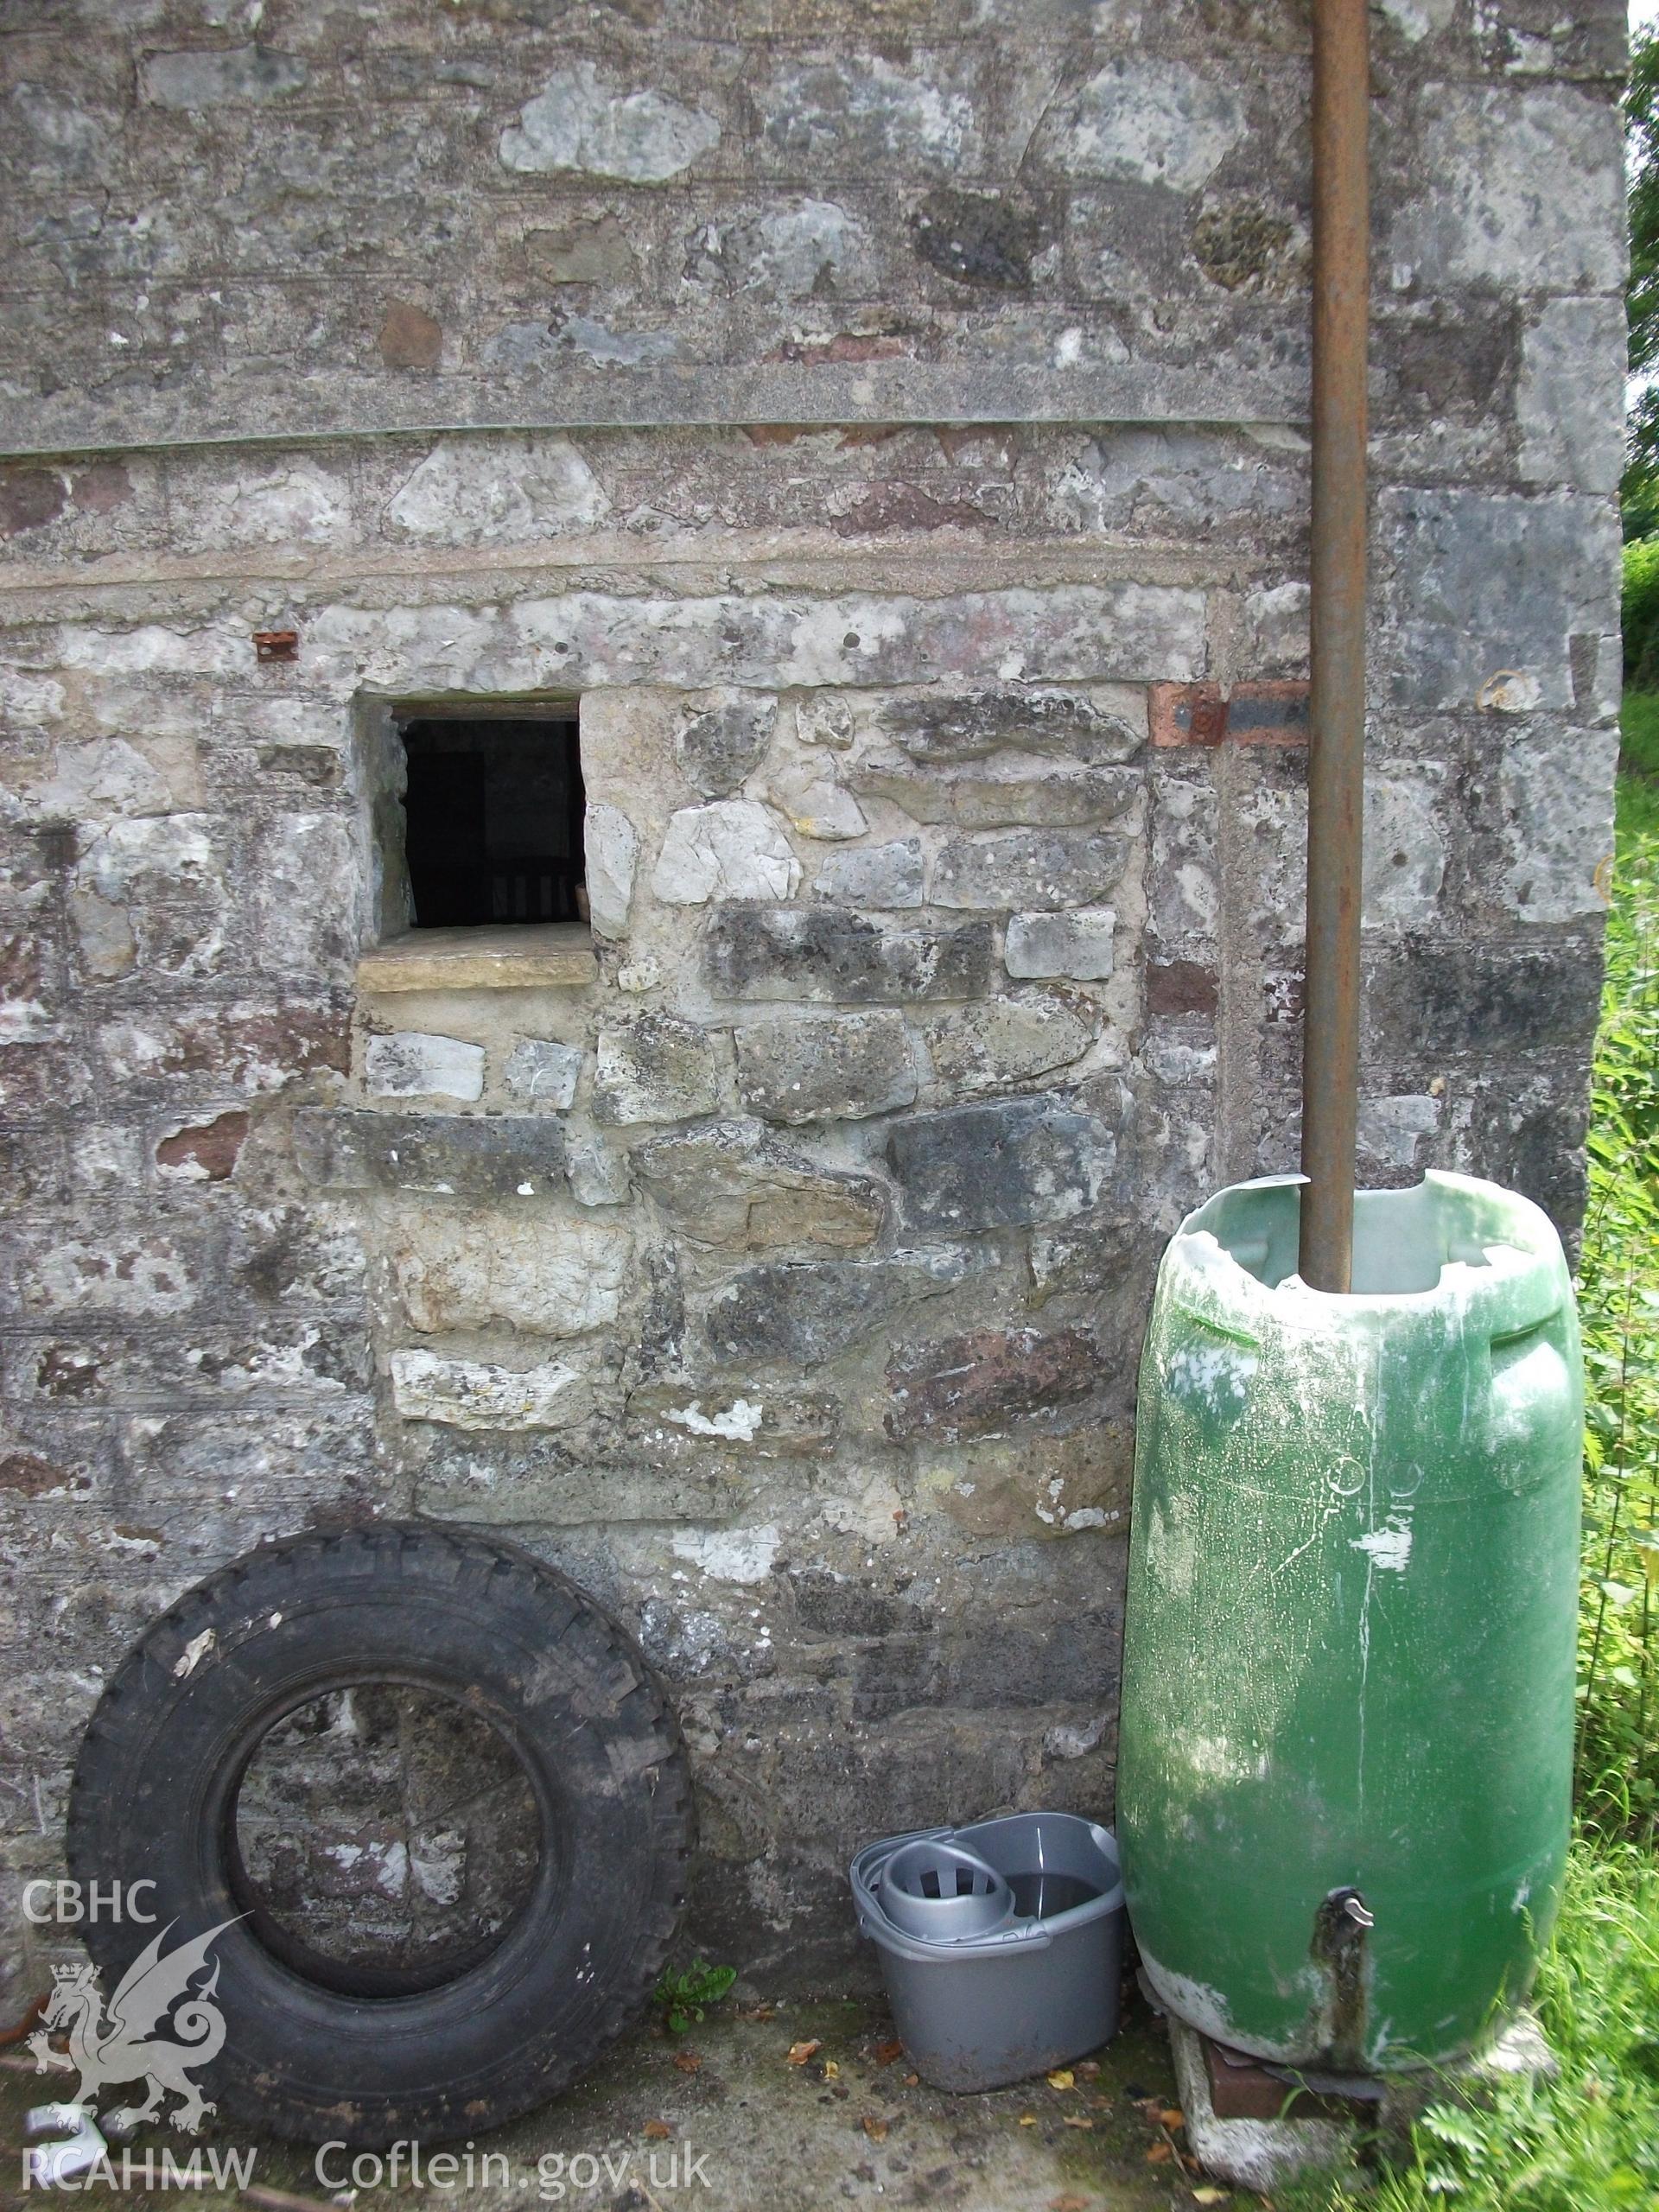 Photograph showing detailed view of the exterior front elevation and water butt of 'ale and pail barn,' at Pant-y-Castell, Maesybont, Photographed by Mark Waghorn to meet a condition attached to planning application.